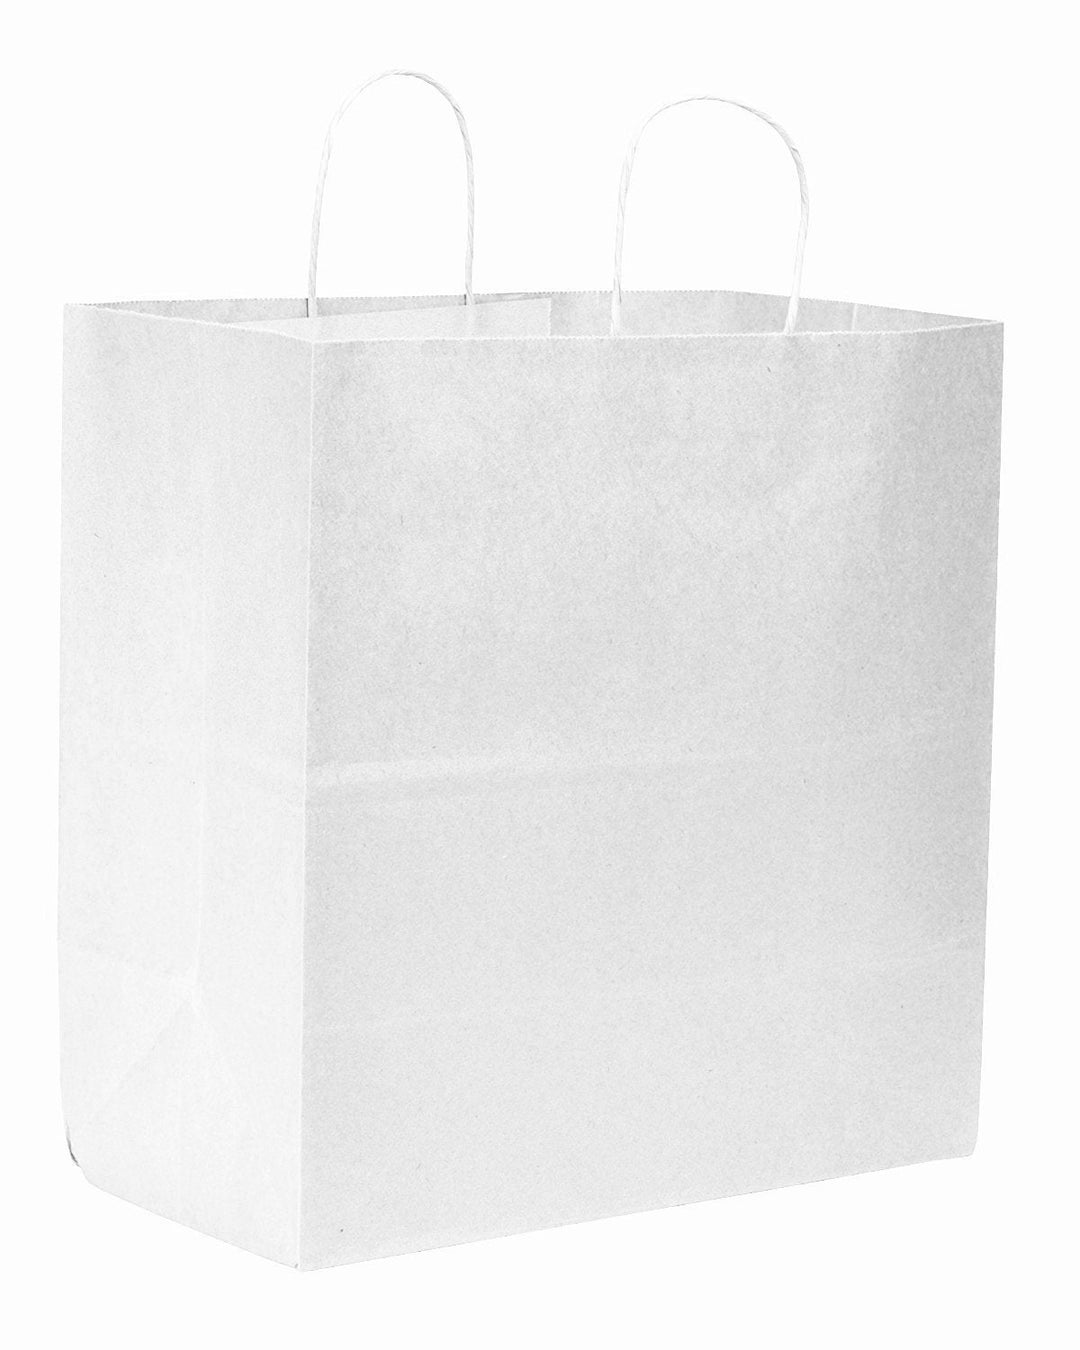 Super Royal White Paper Bags With Handles 200/Bundle